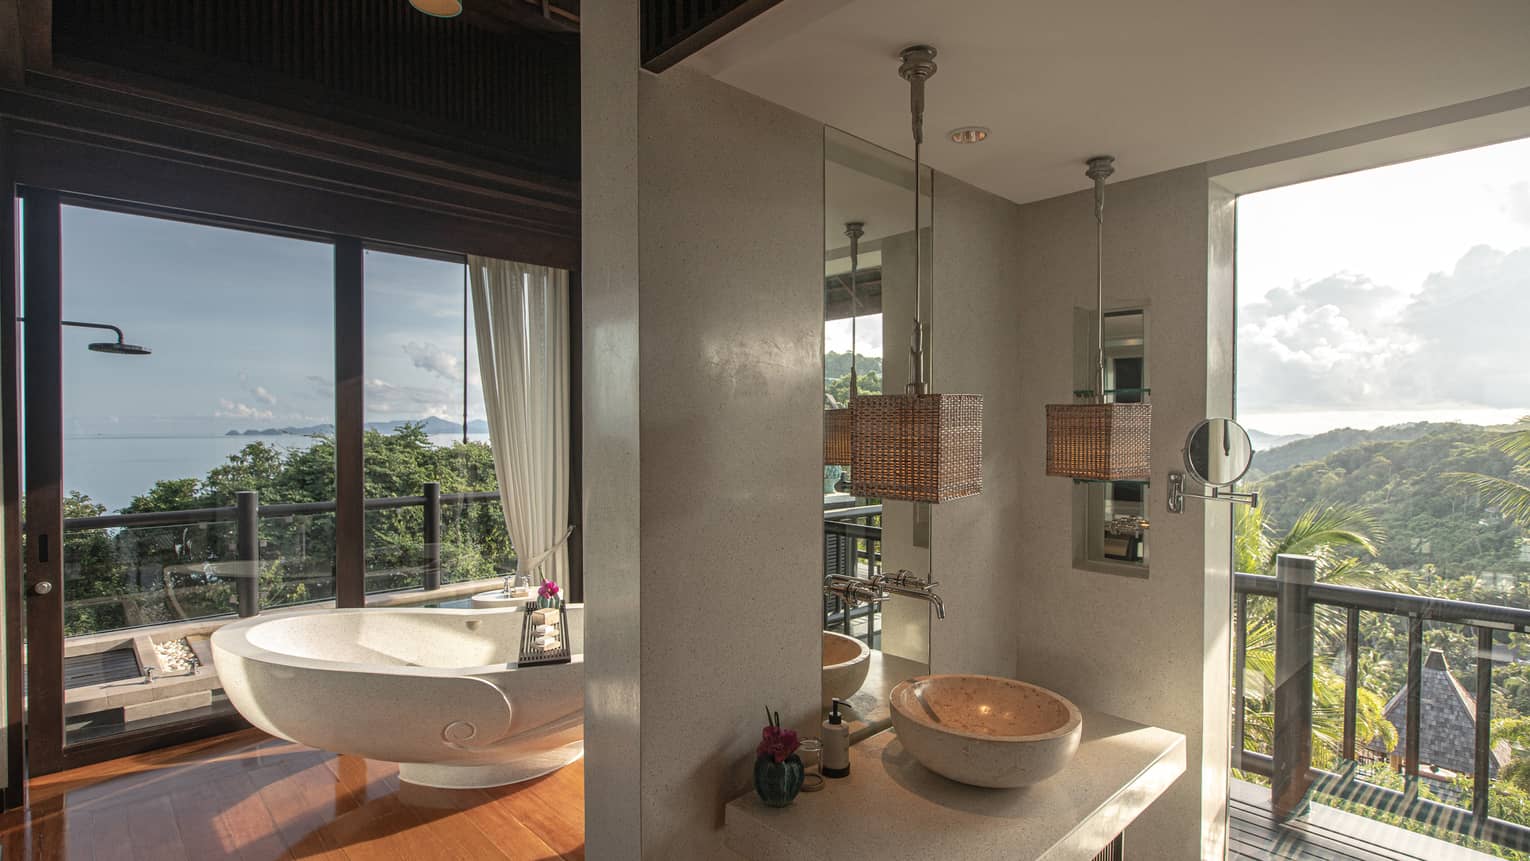 Bathroom opening to tropical view